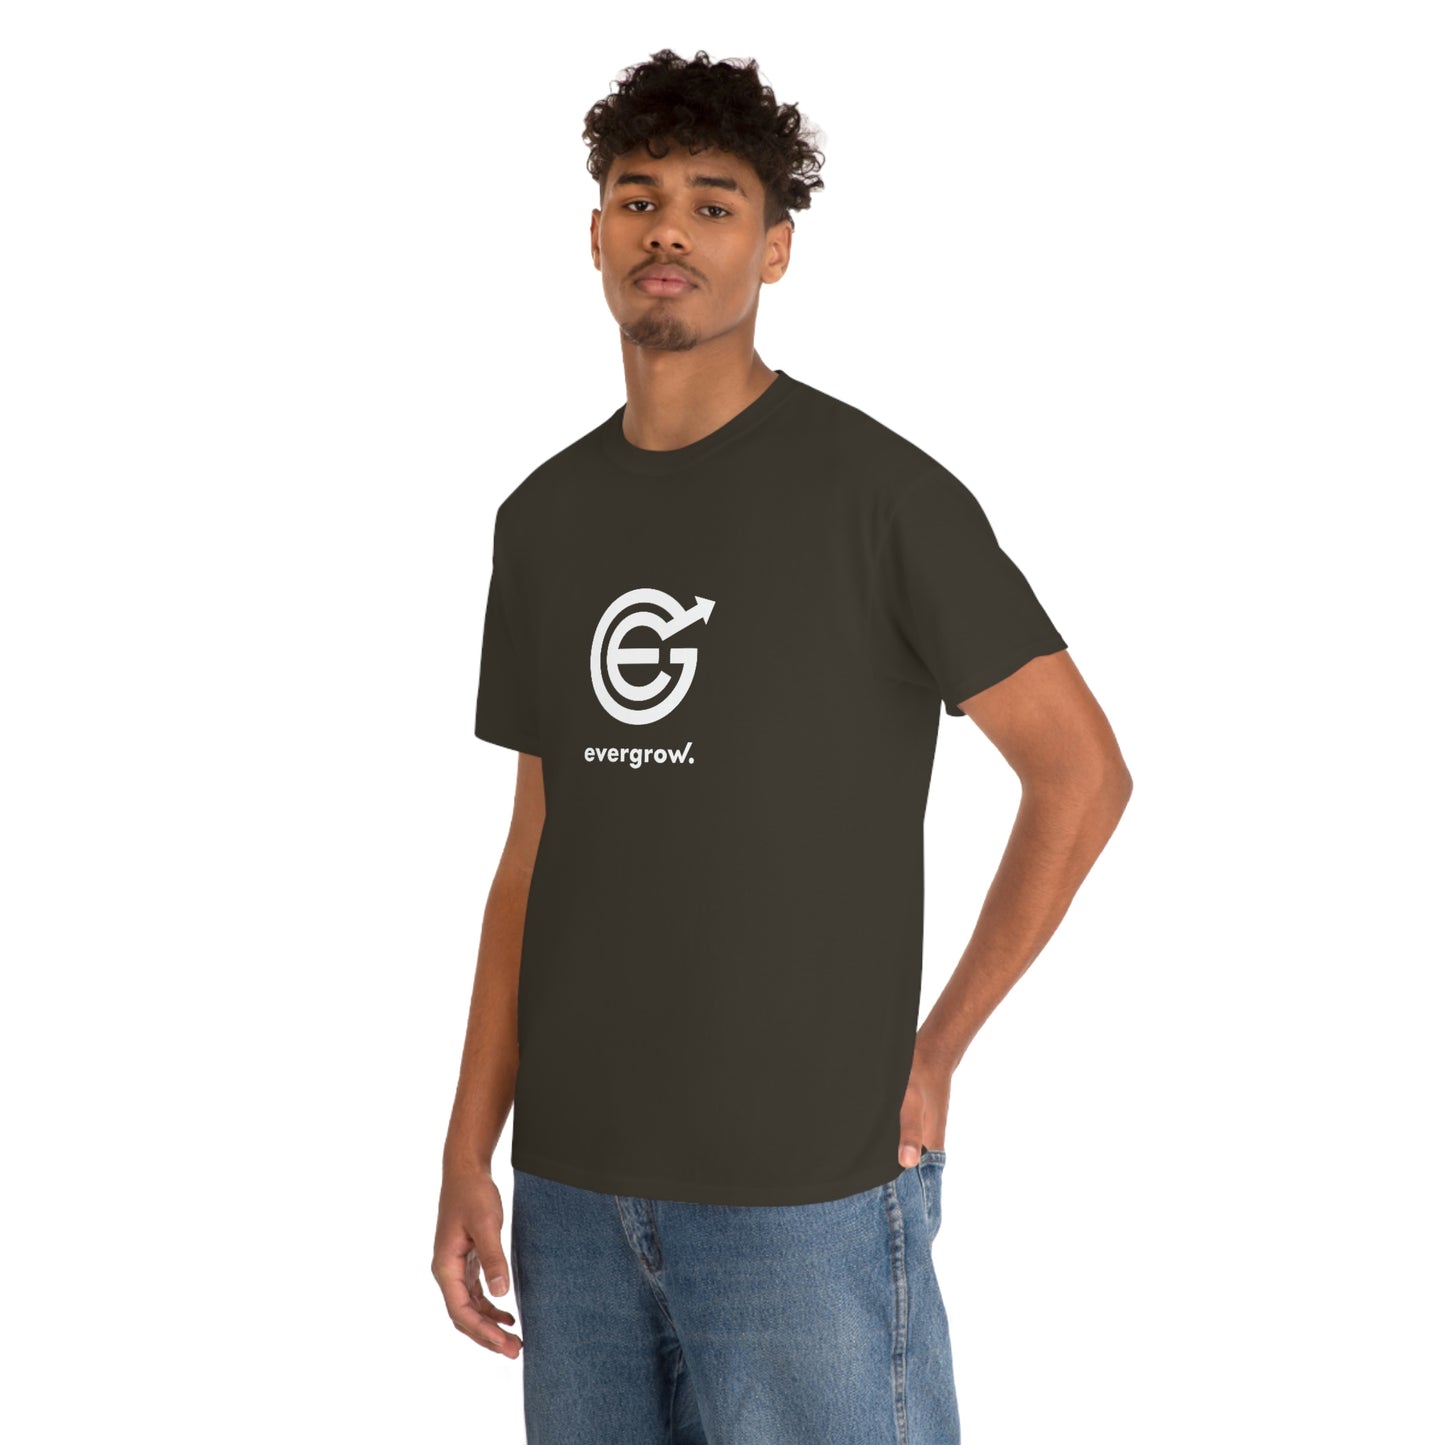 Copy of USA - Unisex Heavy Cotton Tee - EverGrow Logo in White and evergrow below - White shirt using EGC Purple color